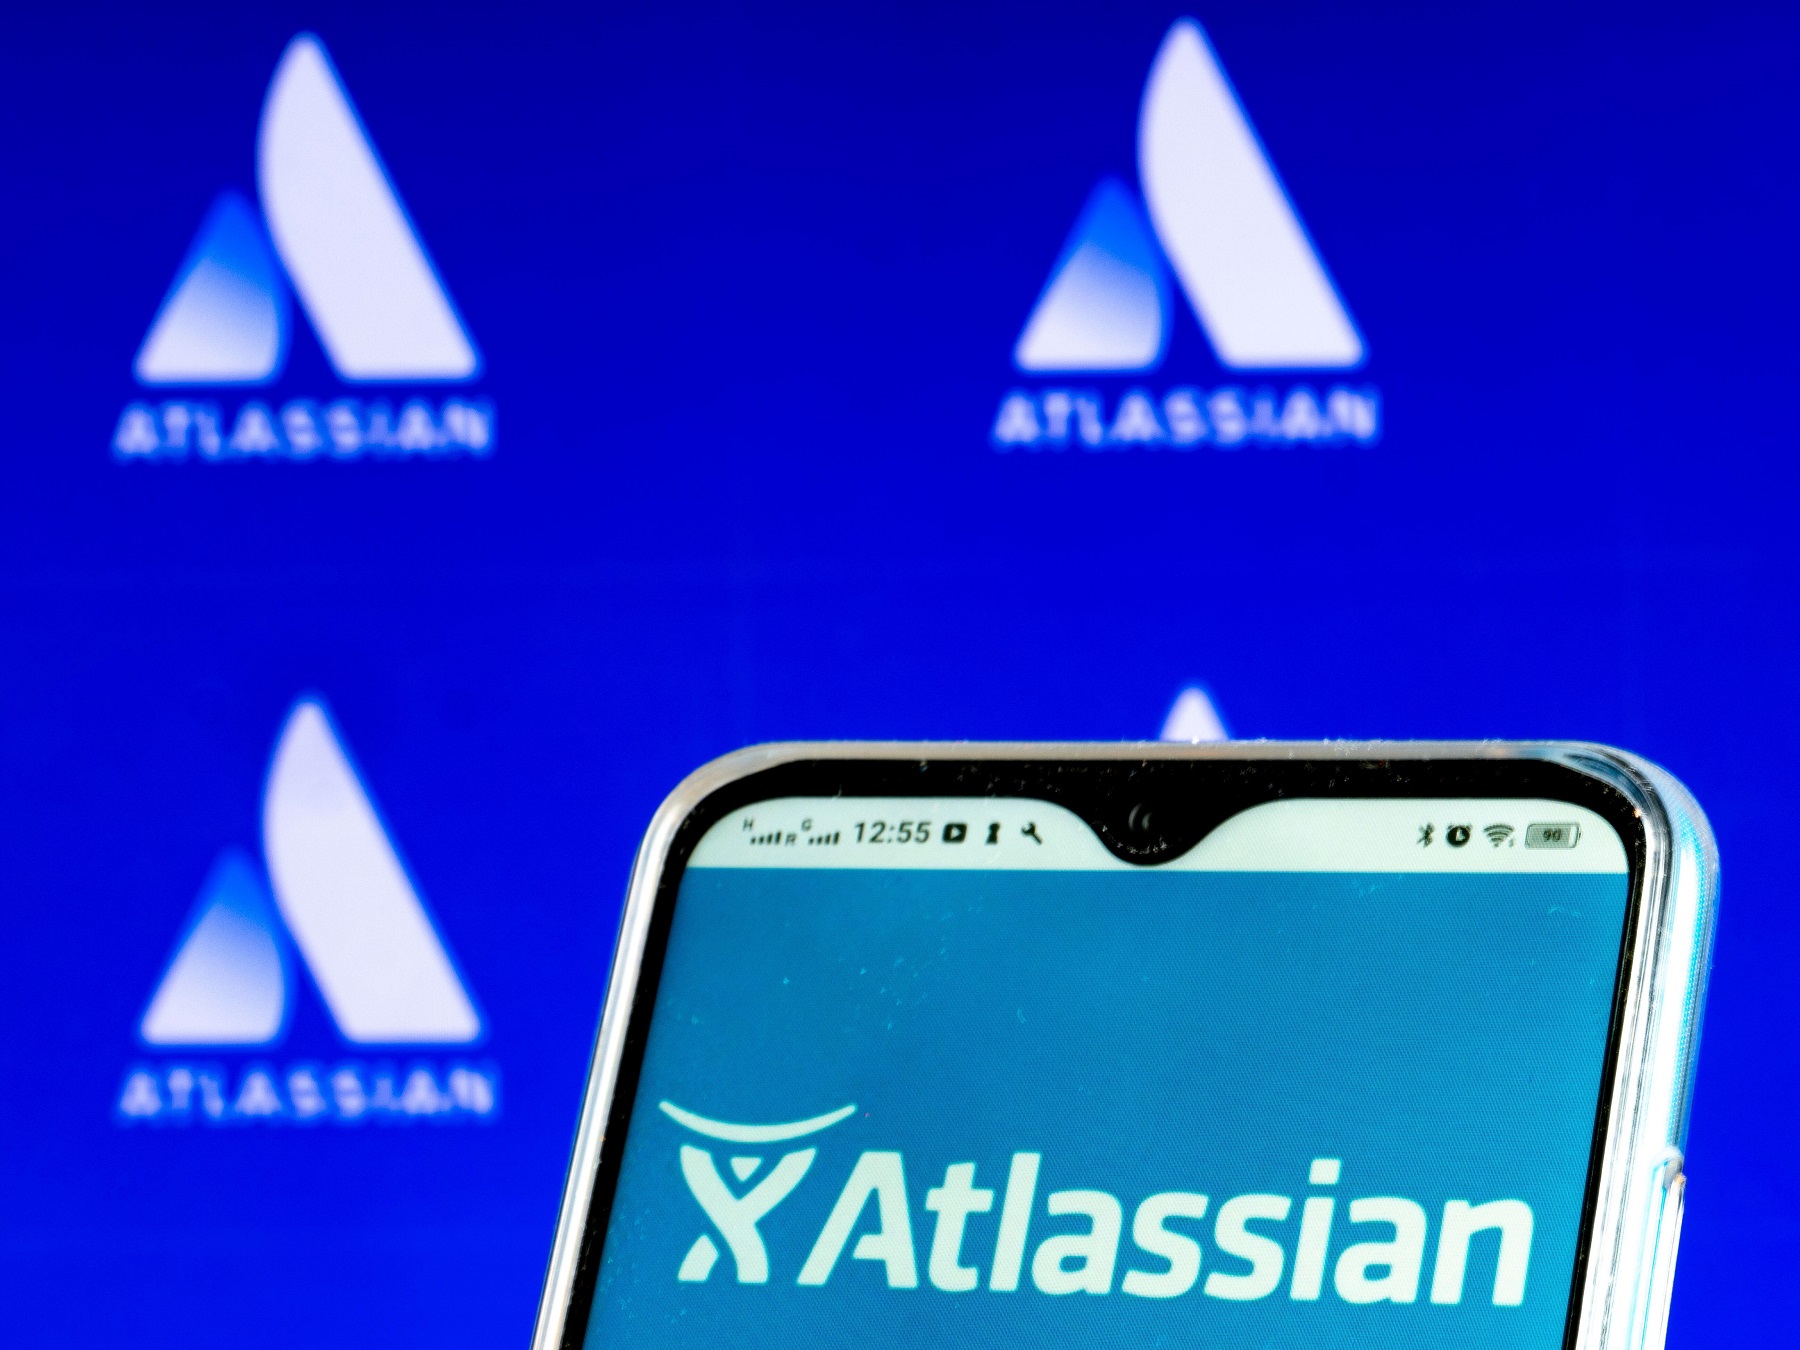 From Dark Reading – Atlassian Customers Should Patch Latest Critical Vuln Immediately